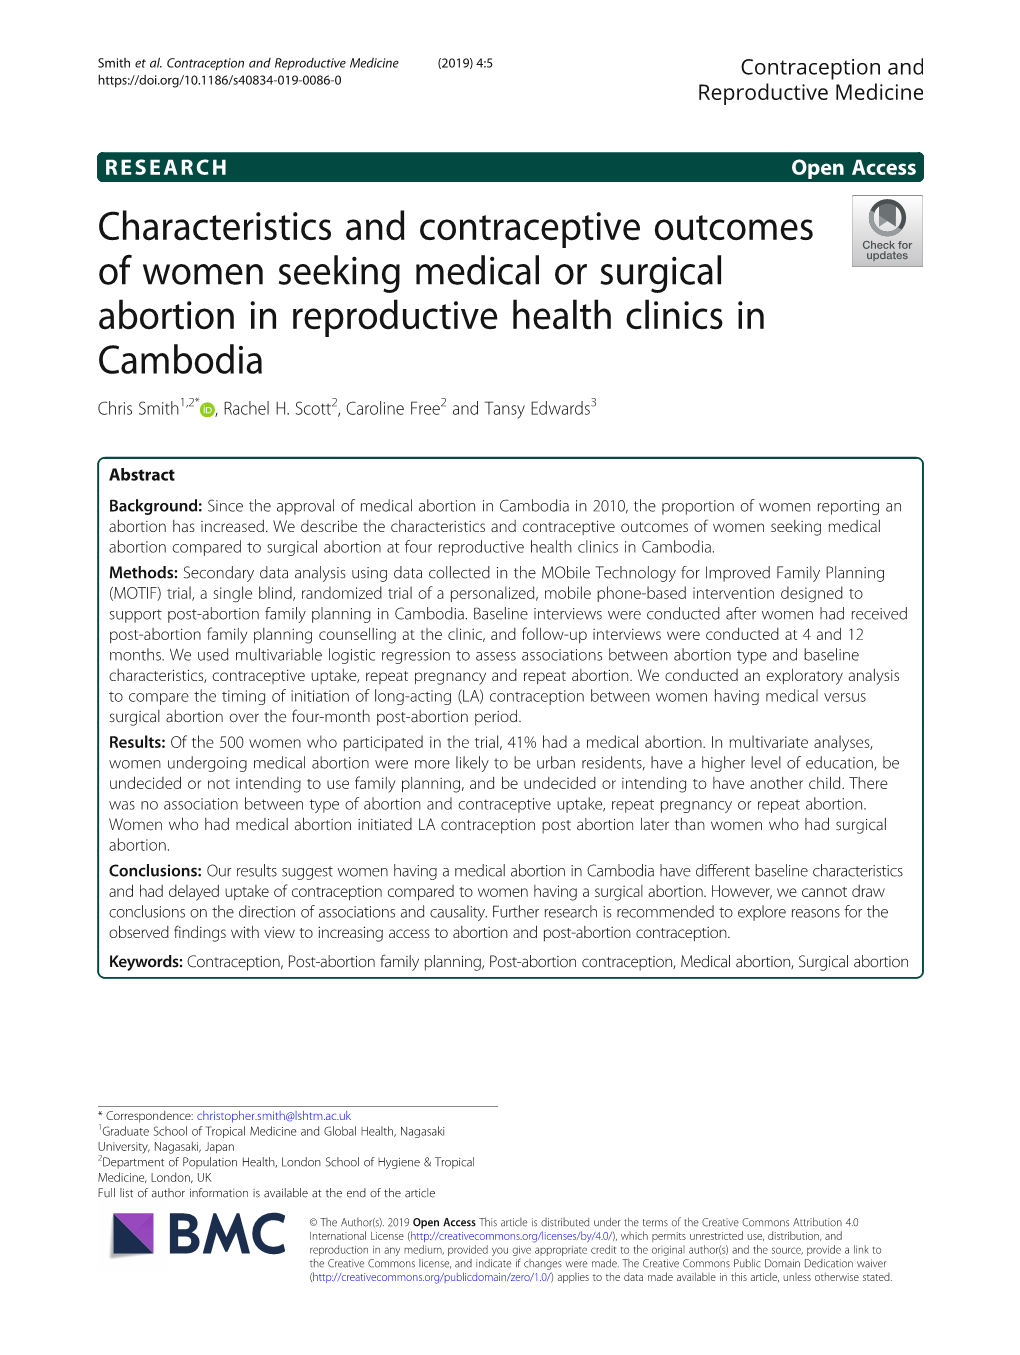 Characteristics and Contraceptive Outcomes of Women Seeking Medical Or Surgical Abortion in Reproductive Health Clinics in Cambodia Chris Smith1,2* , Rachel H